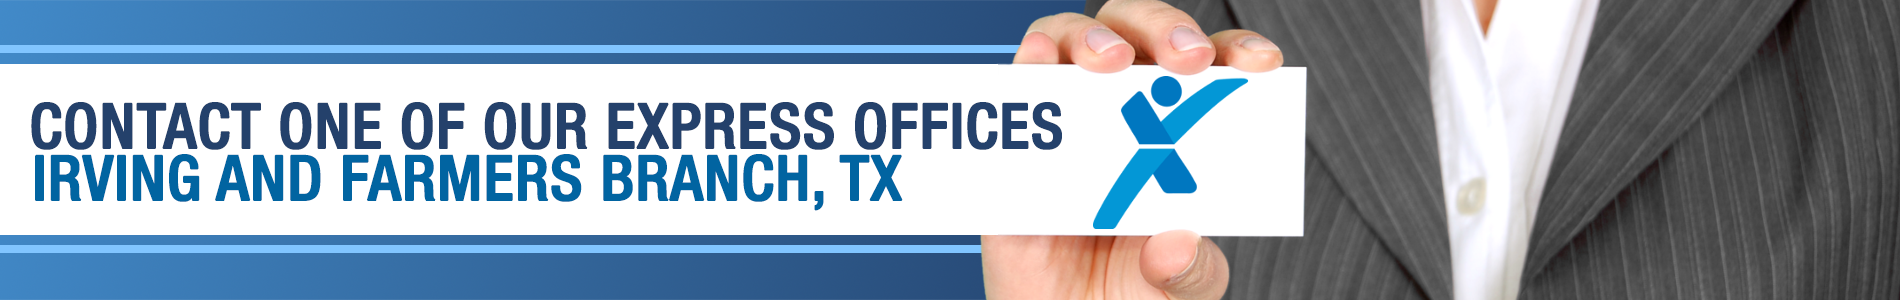 Contact our staffing agencies in Irving, TX and Farmers Branch, TX